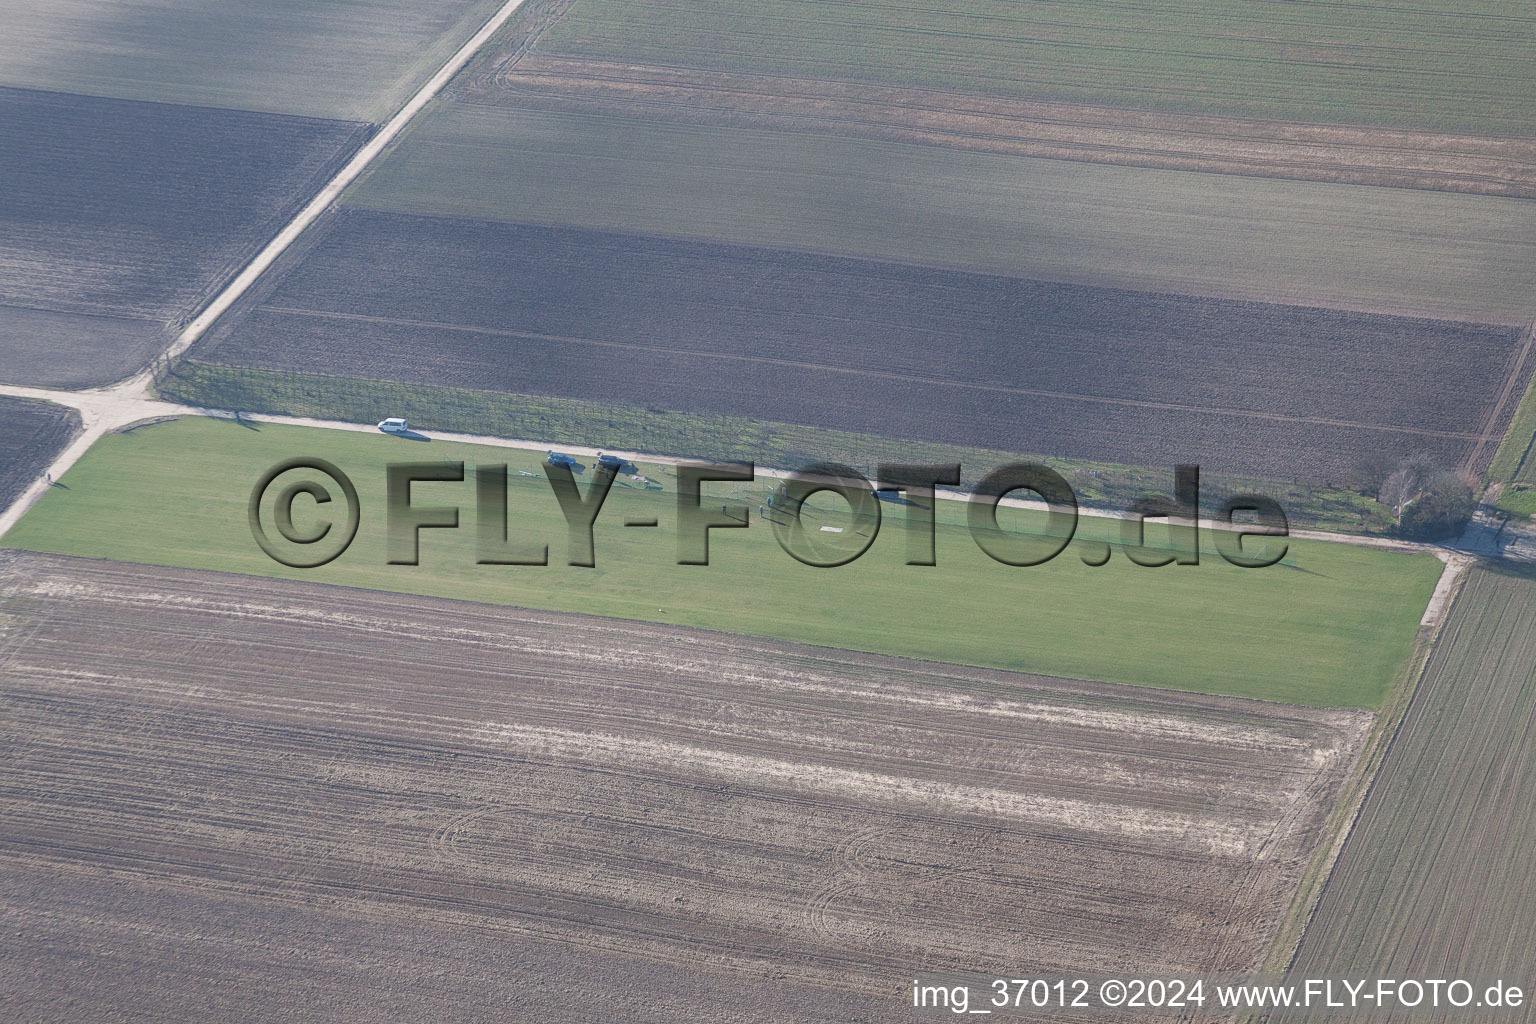 Model airfield in Offenbach an der Queich in the state Rhineland-Palatinate, Germany seen from above